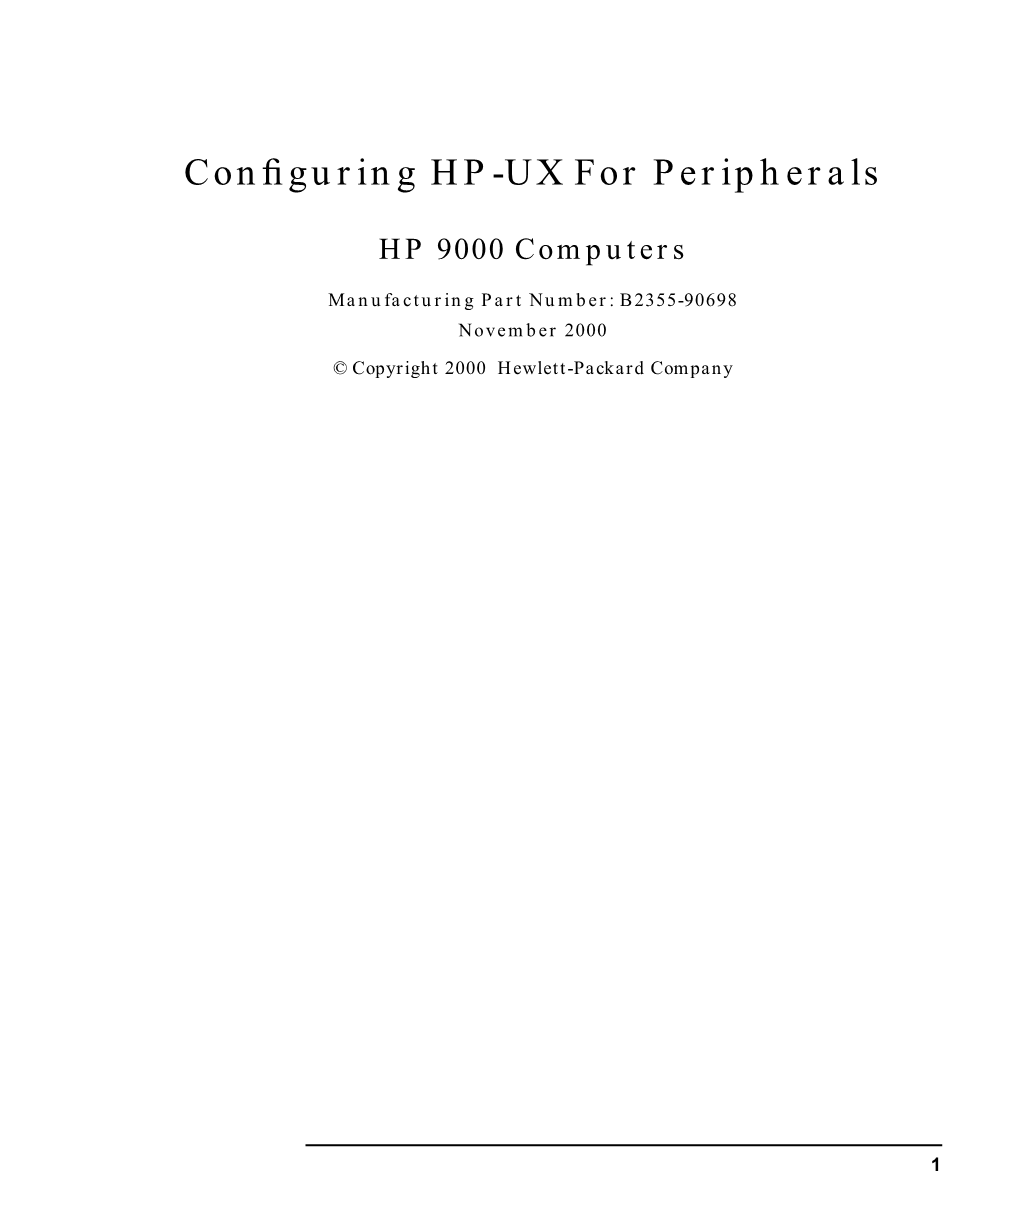 Configuring HP-UX for Peripherals